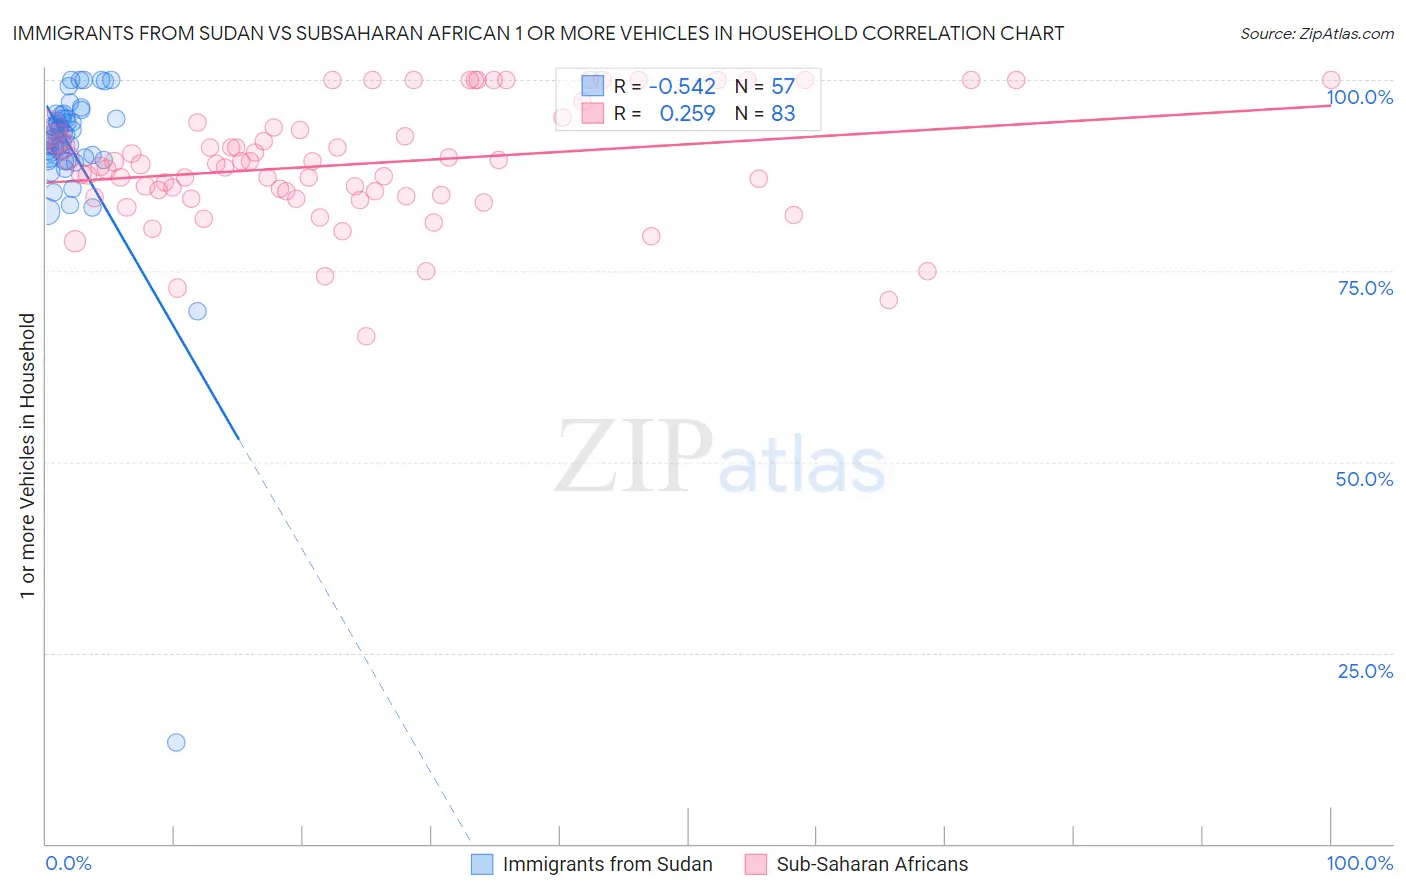 Immigrants from Sudan vs Subsaharan African 1 or more Vehicles in Household